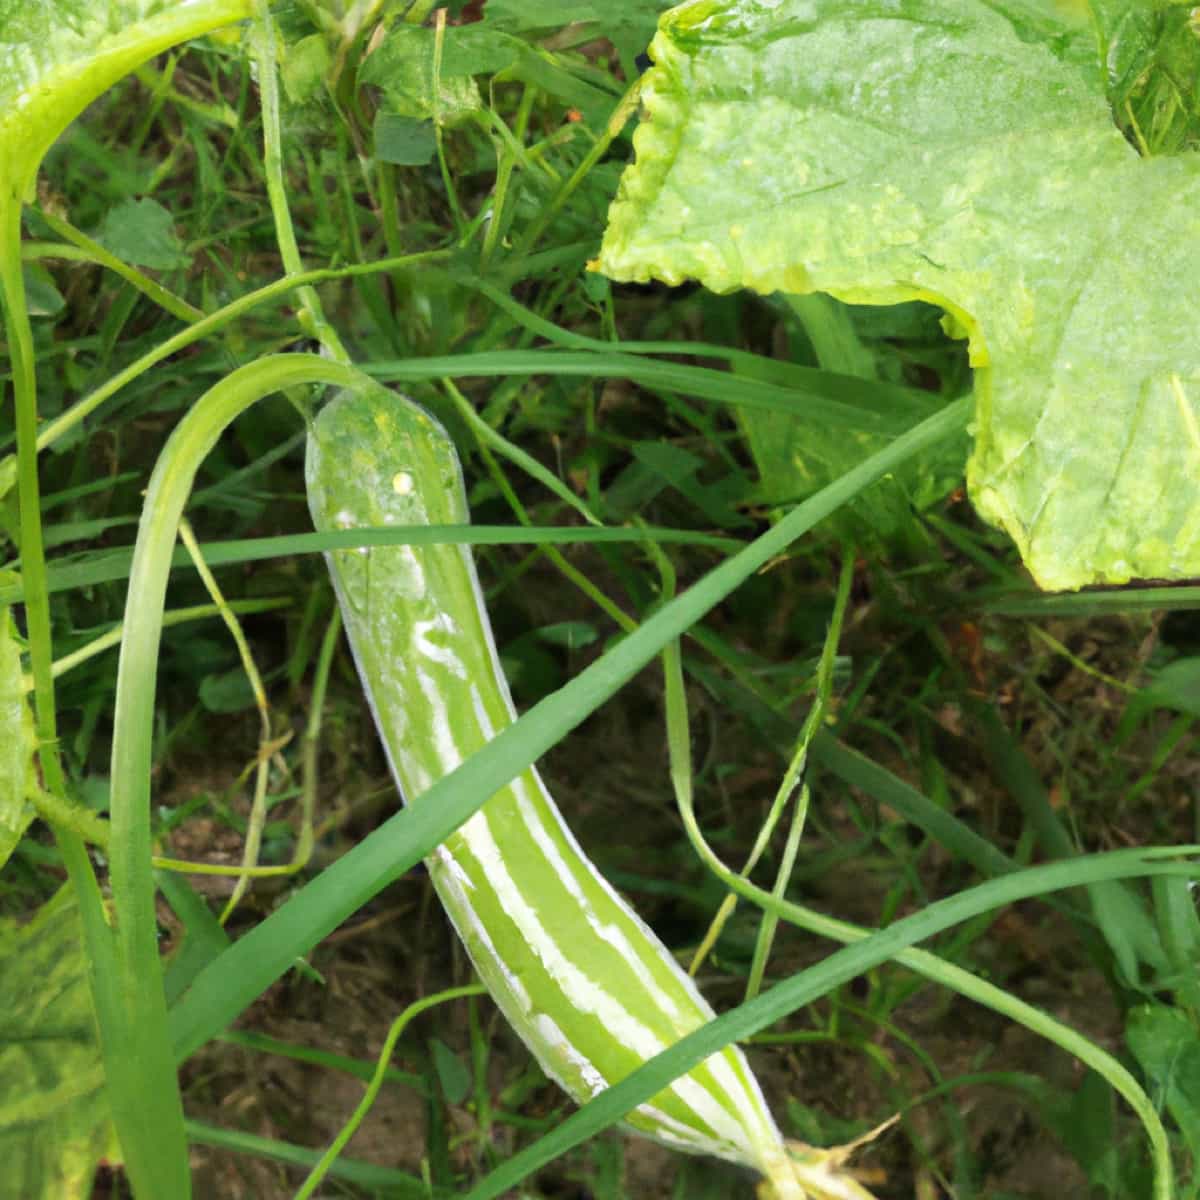 Common Problems with Snake Gourd Plants